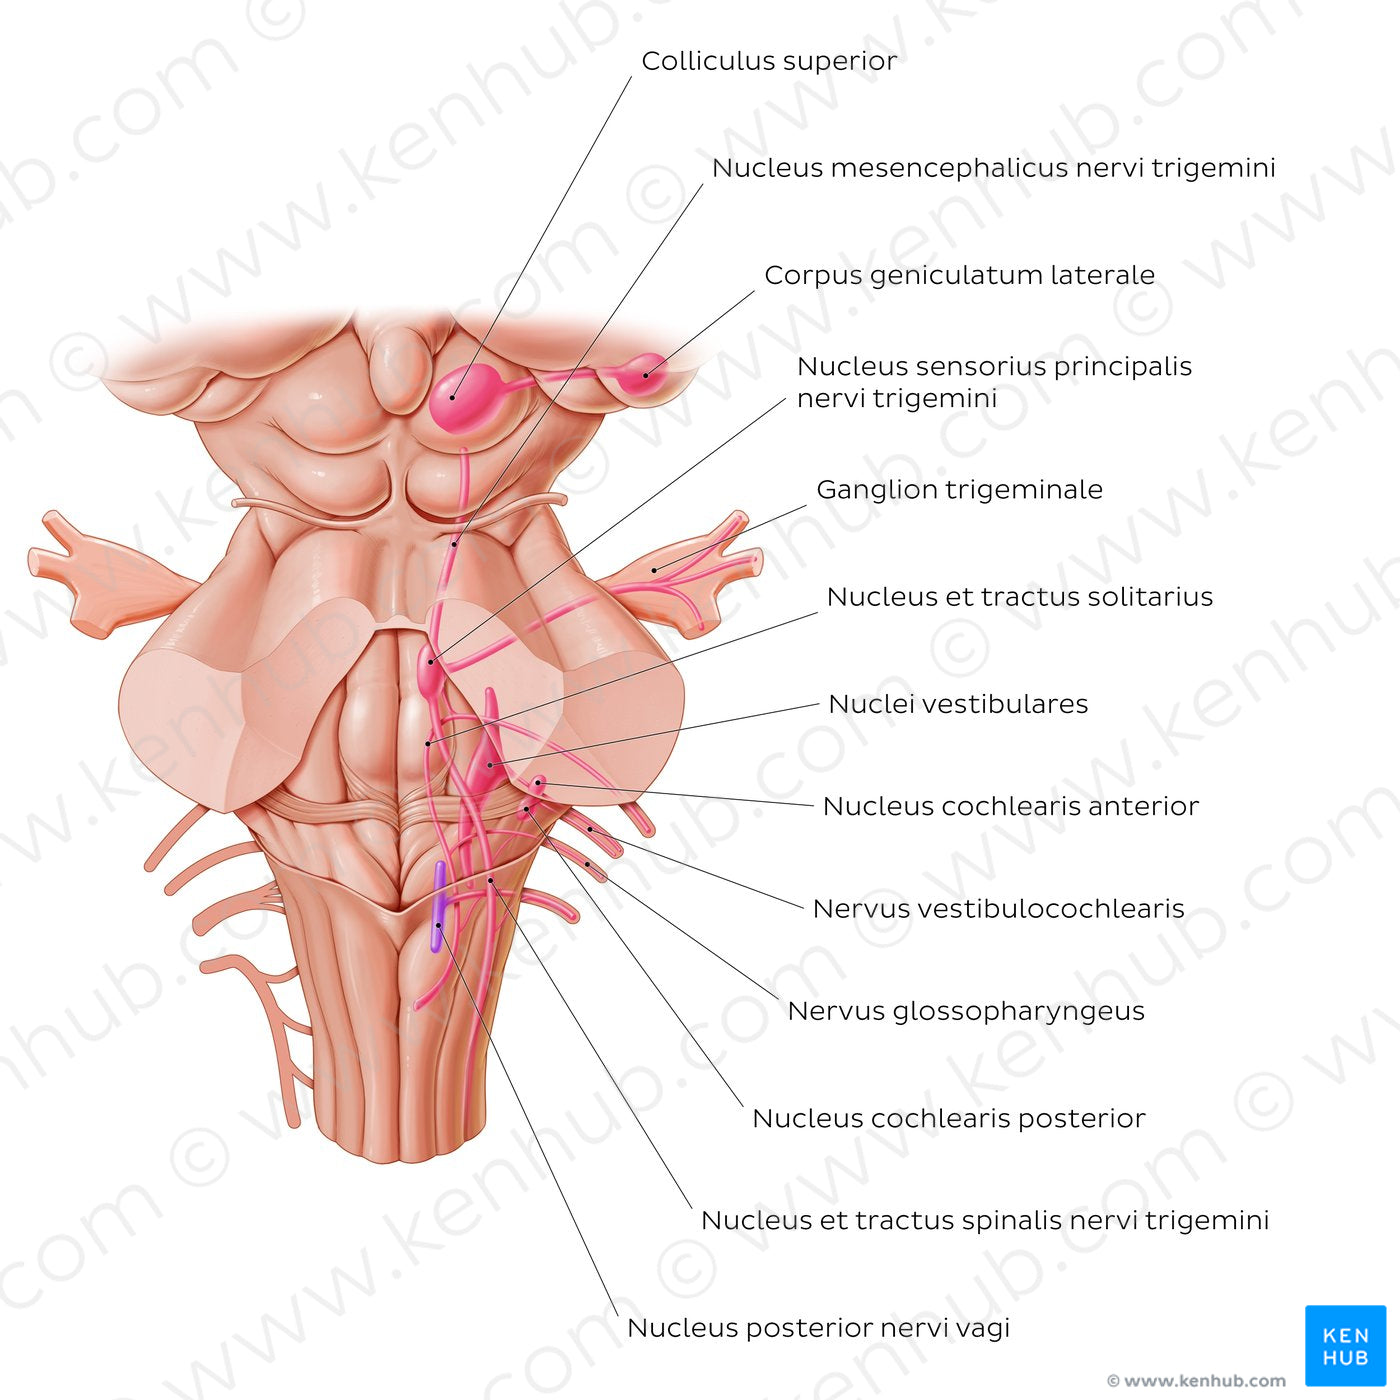 Cranial nerve nuclei - posterior view (afferent) (Latin)